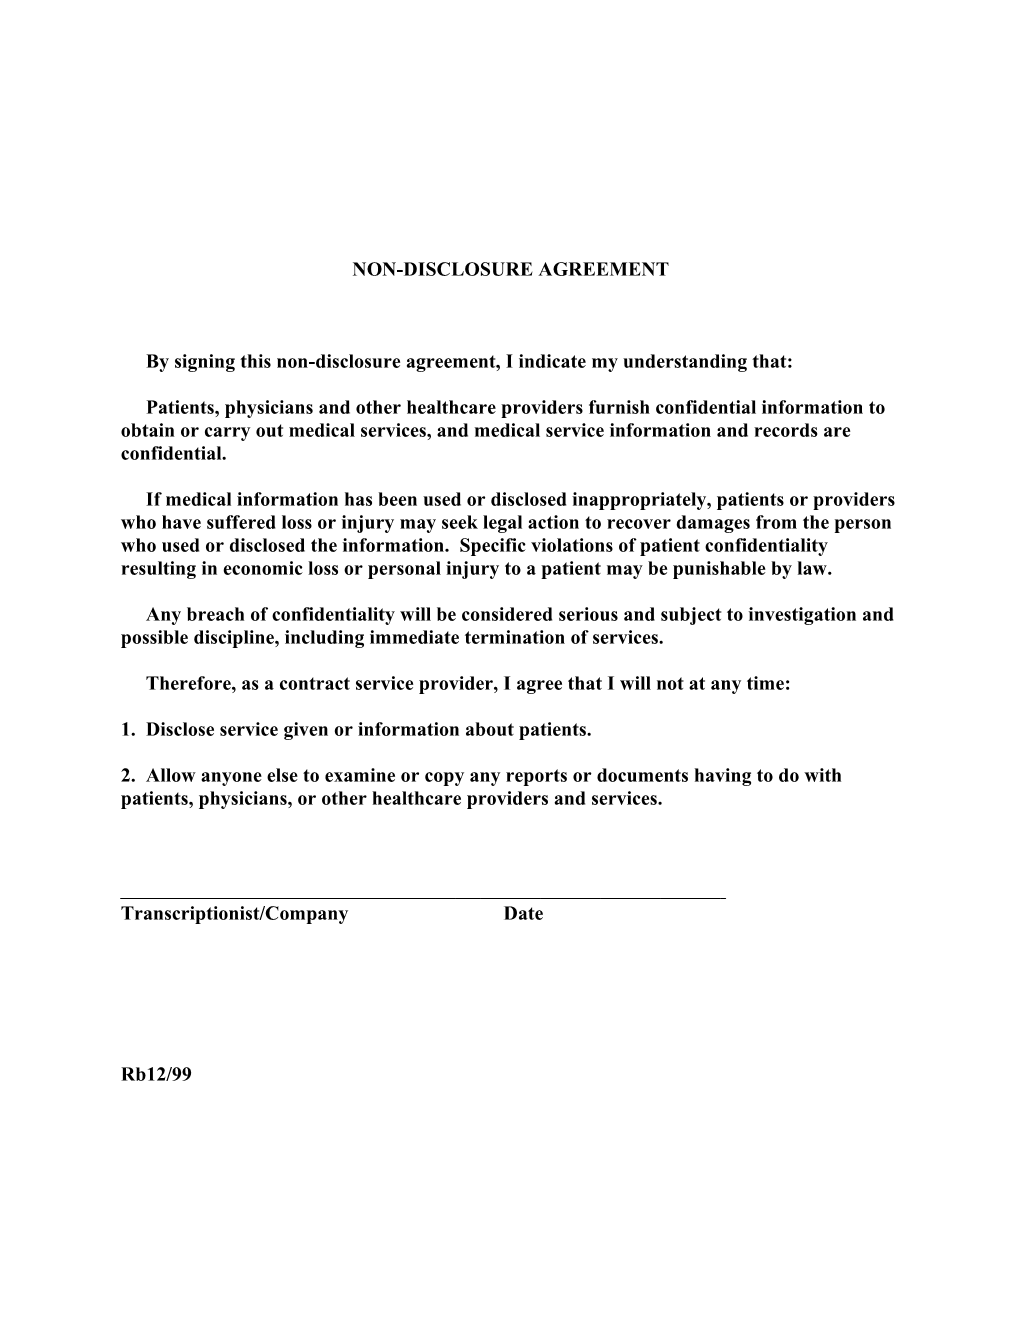 By Signing This Nondisclosure Agreement, I Indicate My Understanding That